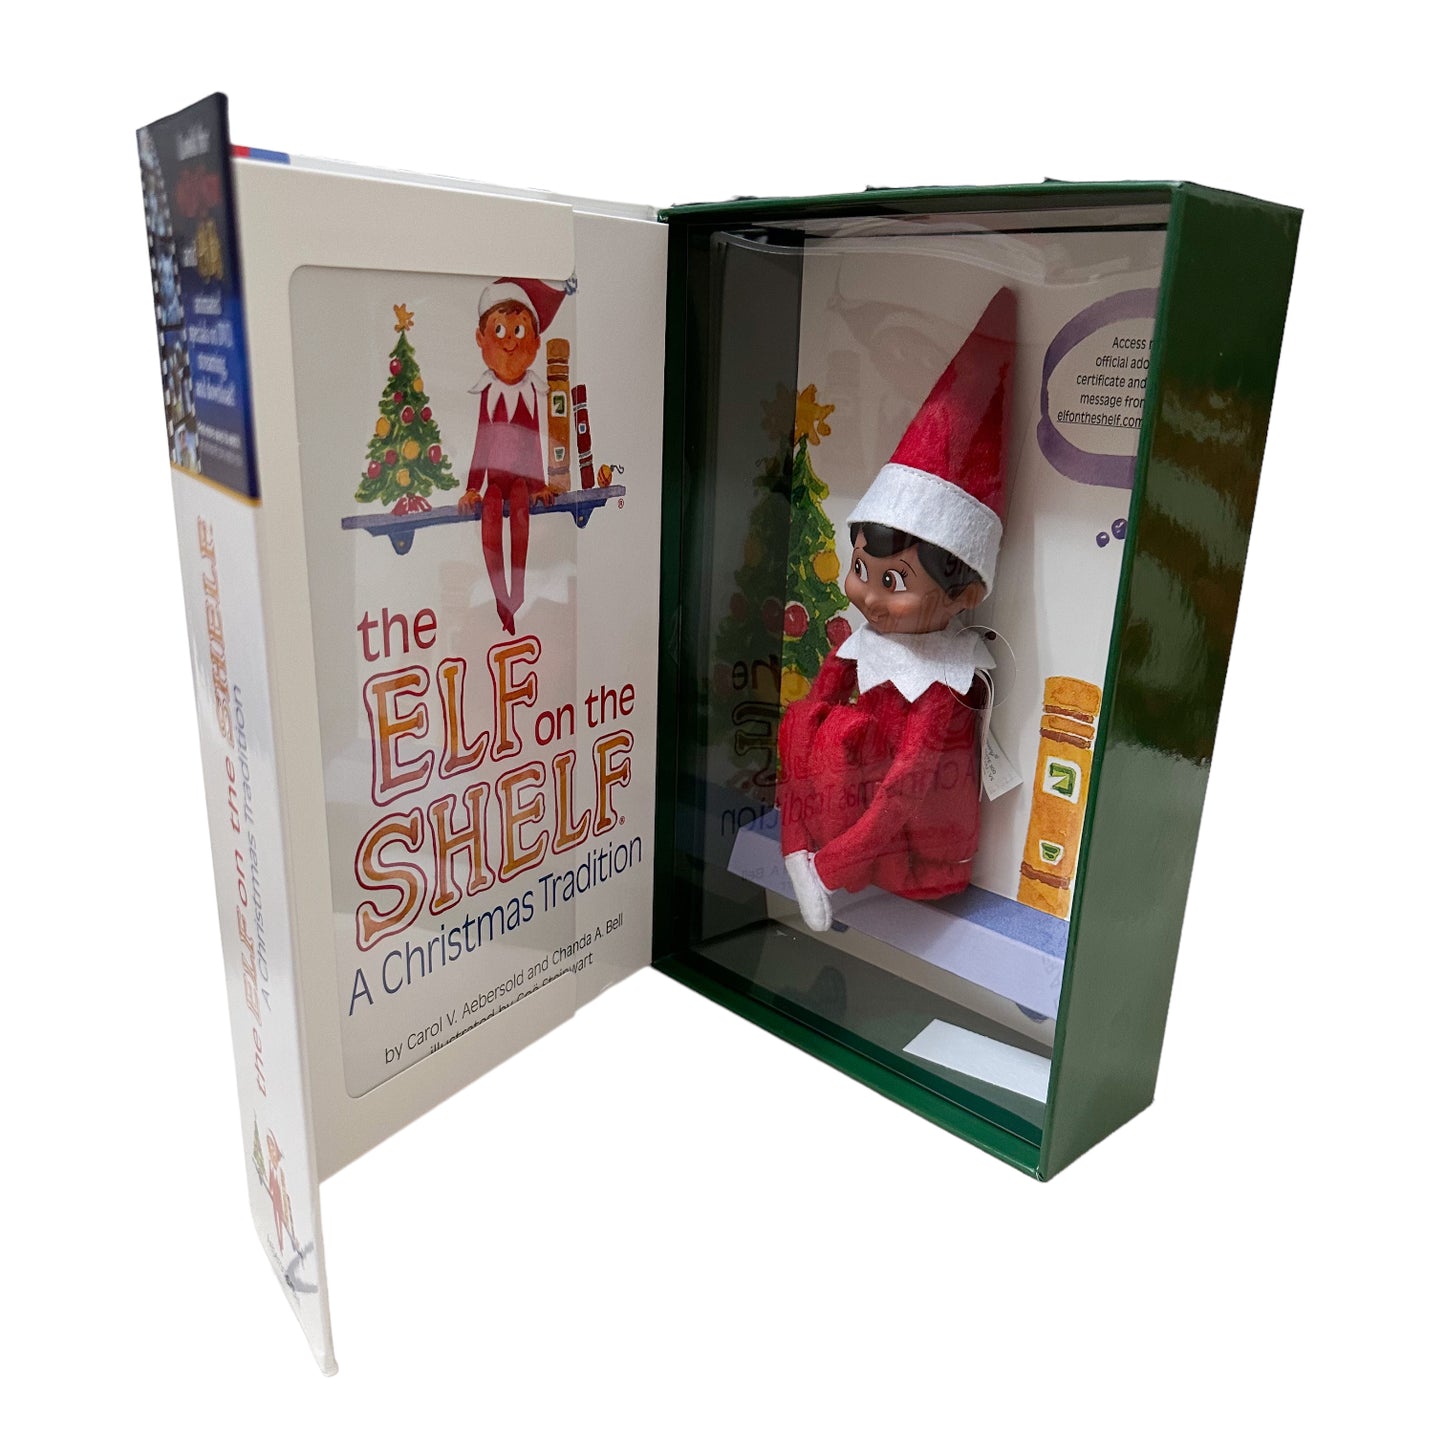 Brown Elf in the box with Hardcover book